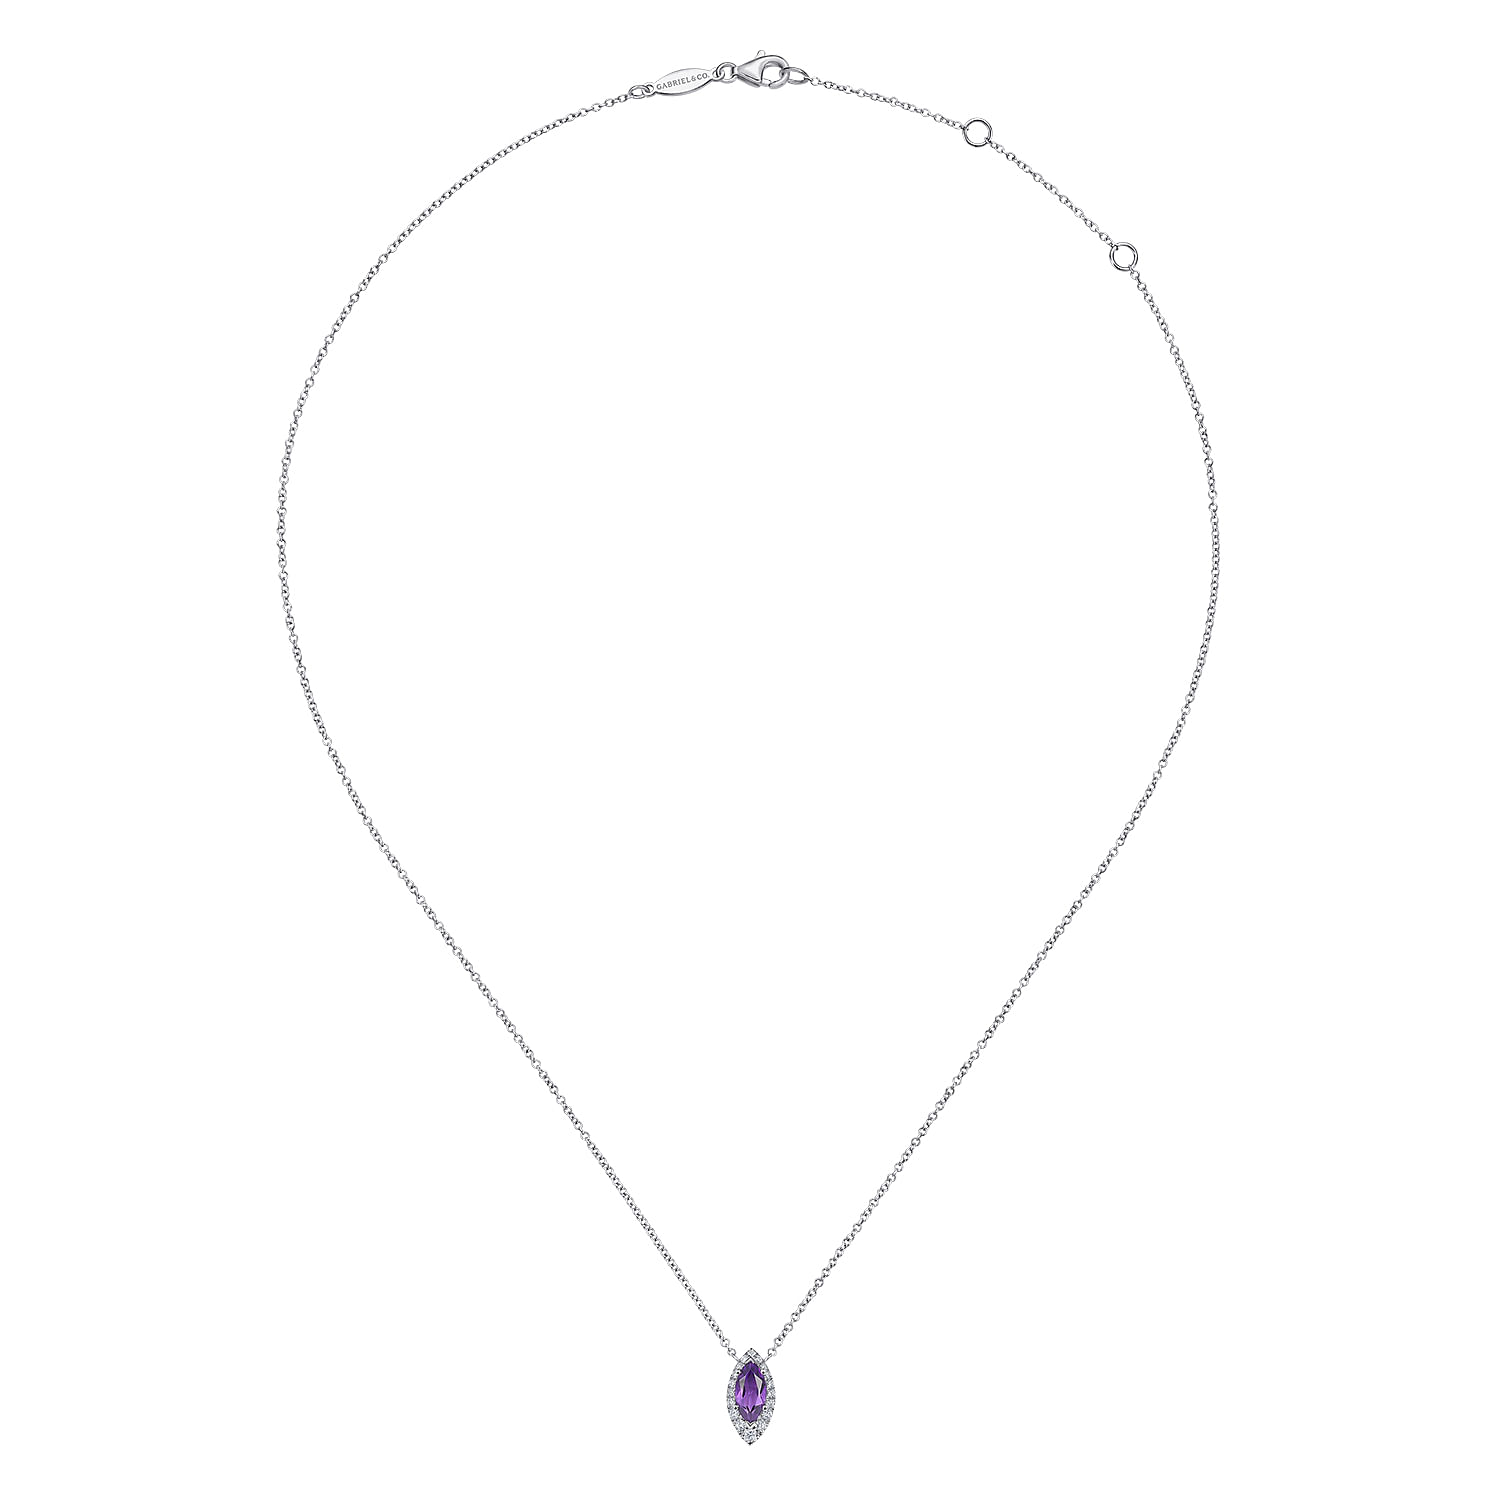 14K White Gold Amethyst Marquise and Diamond Halo Pendant Necklace